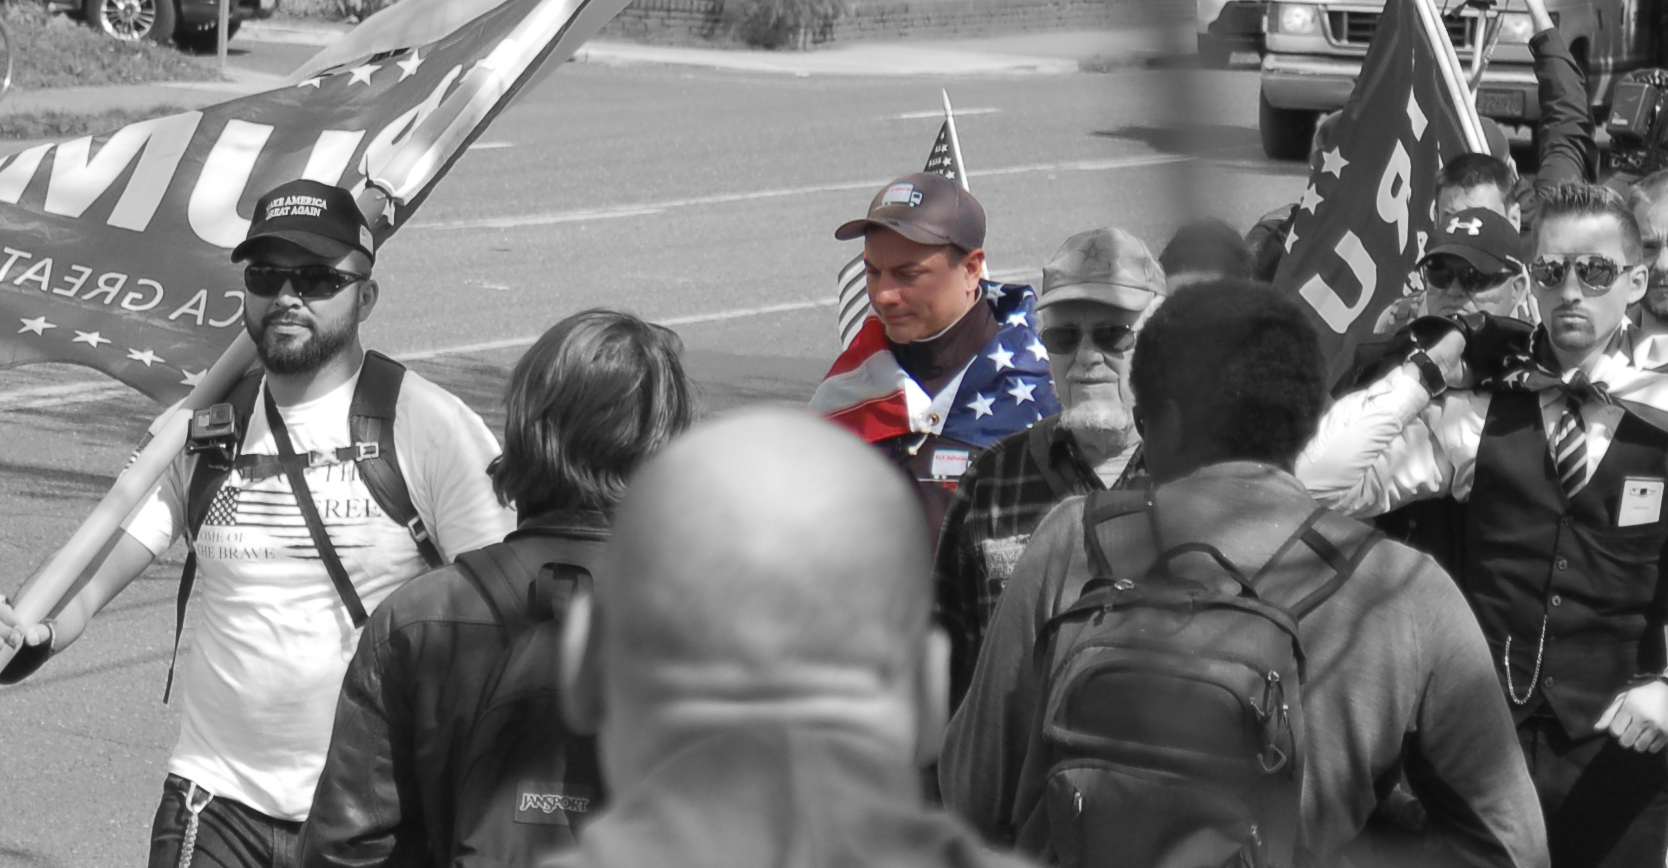 Kristopher Foster at a Patriot Prayer event